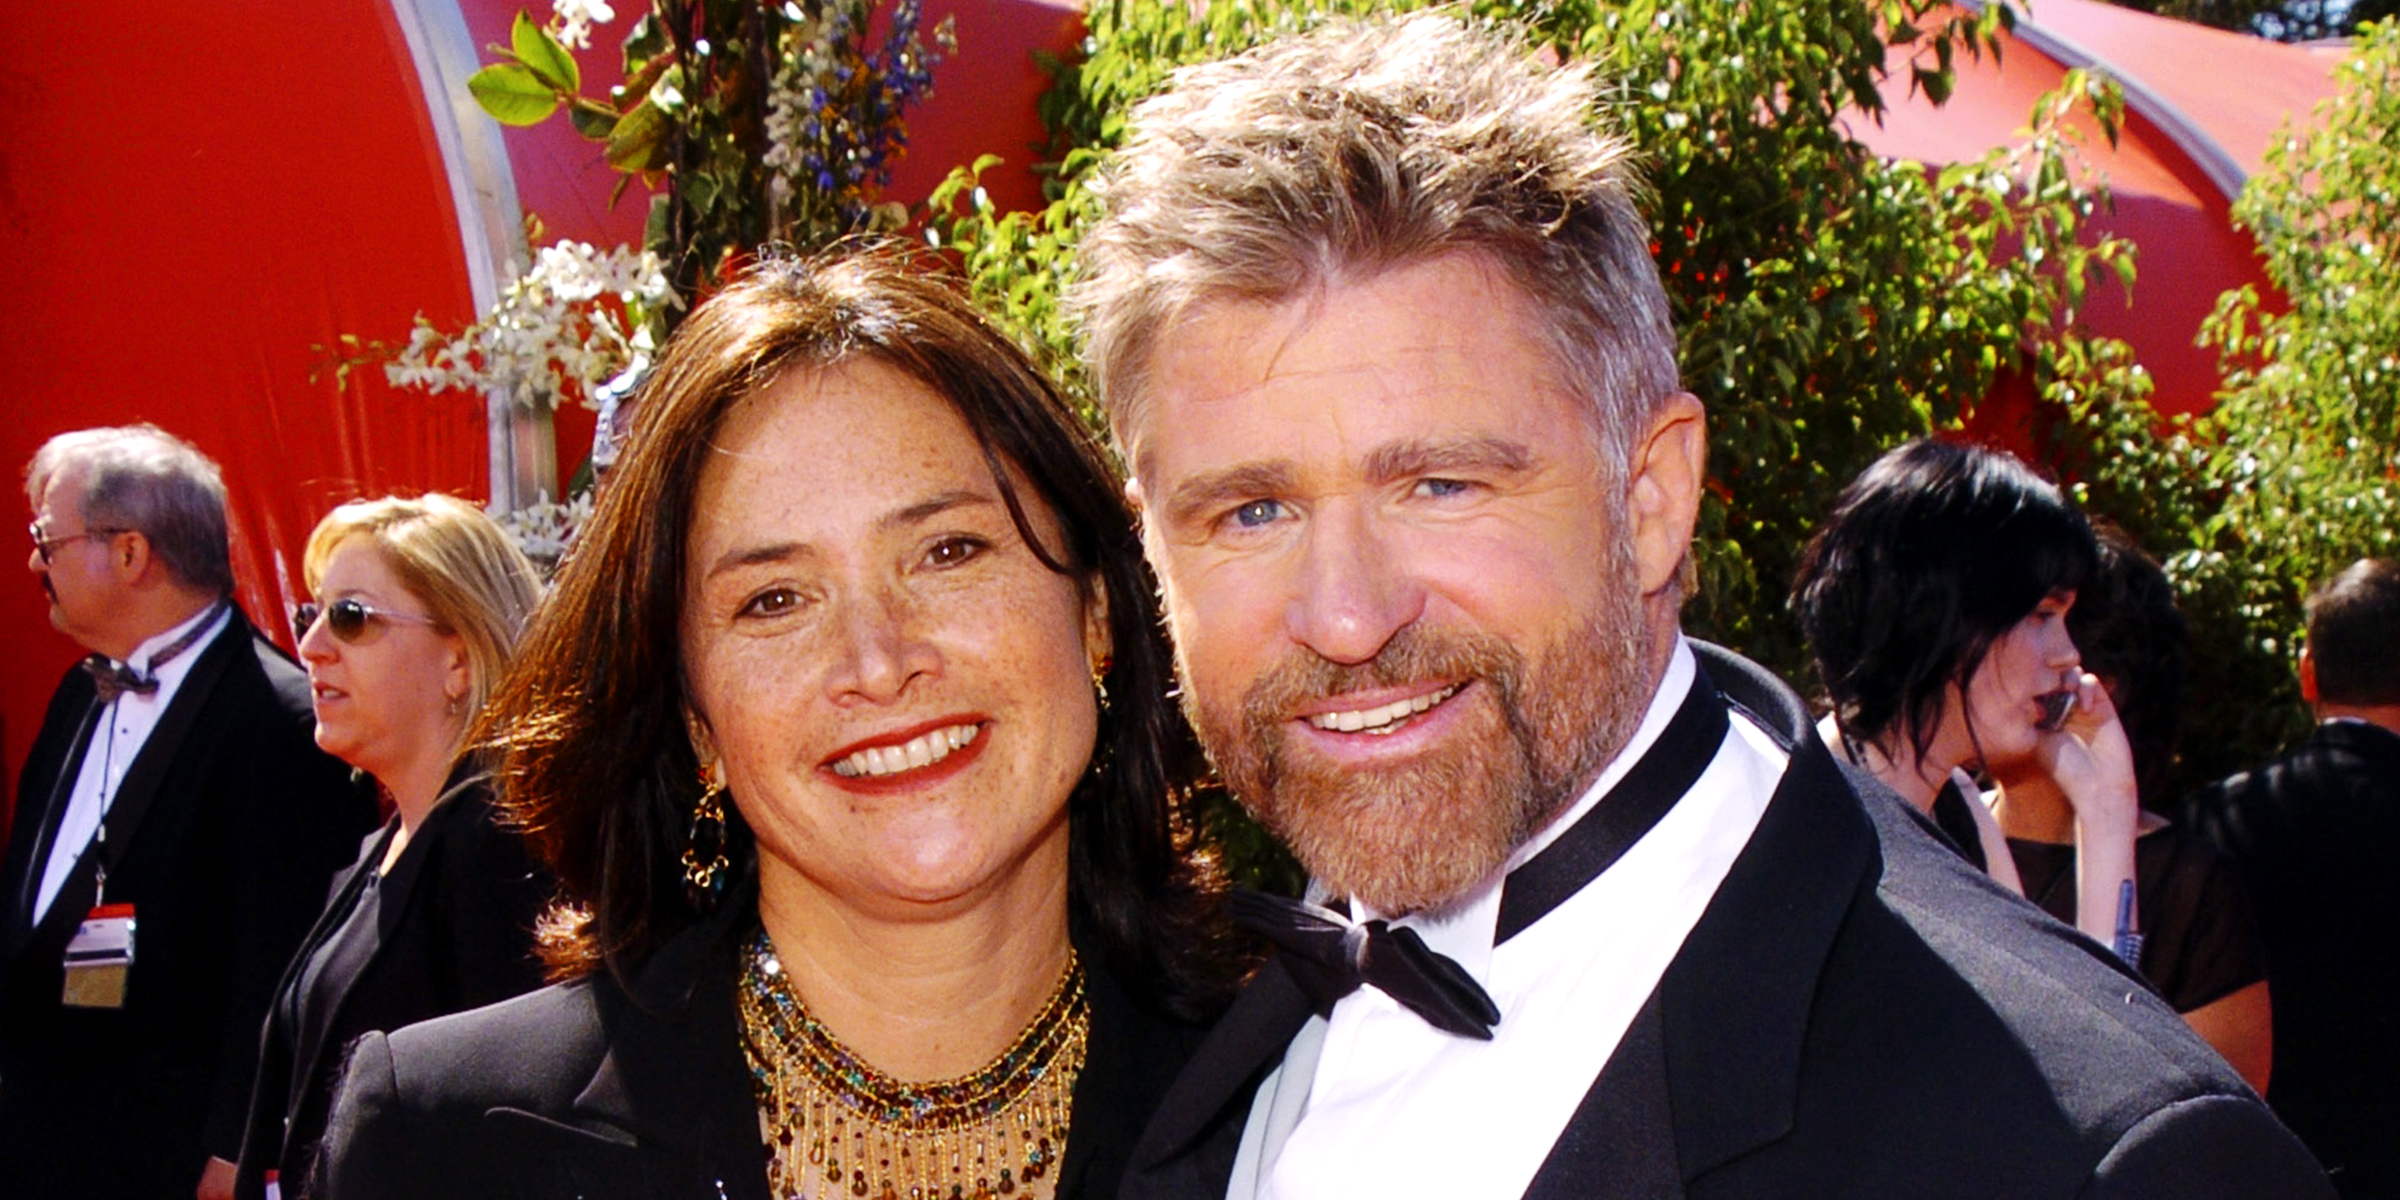 Pam Van Sant and Treat Williams | Source: Getty Images